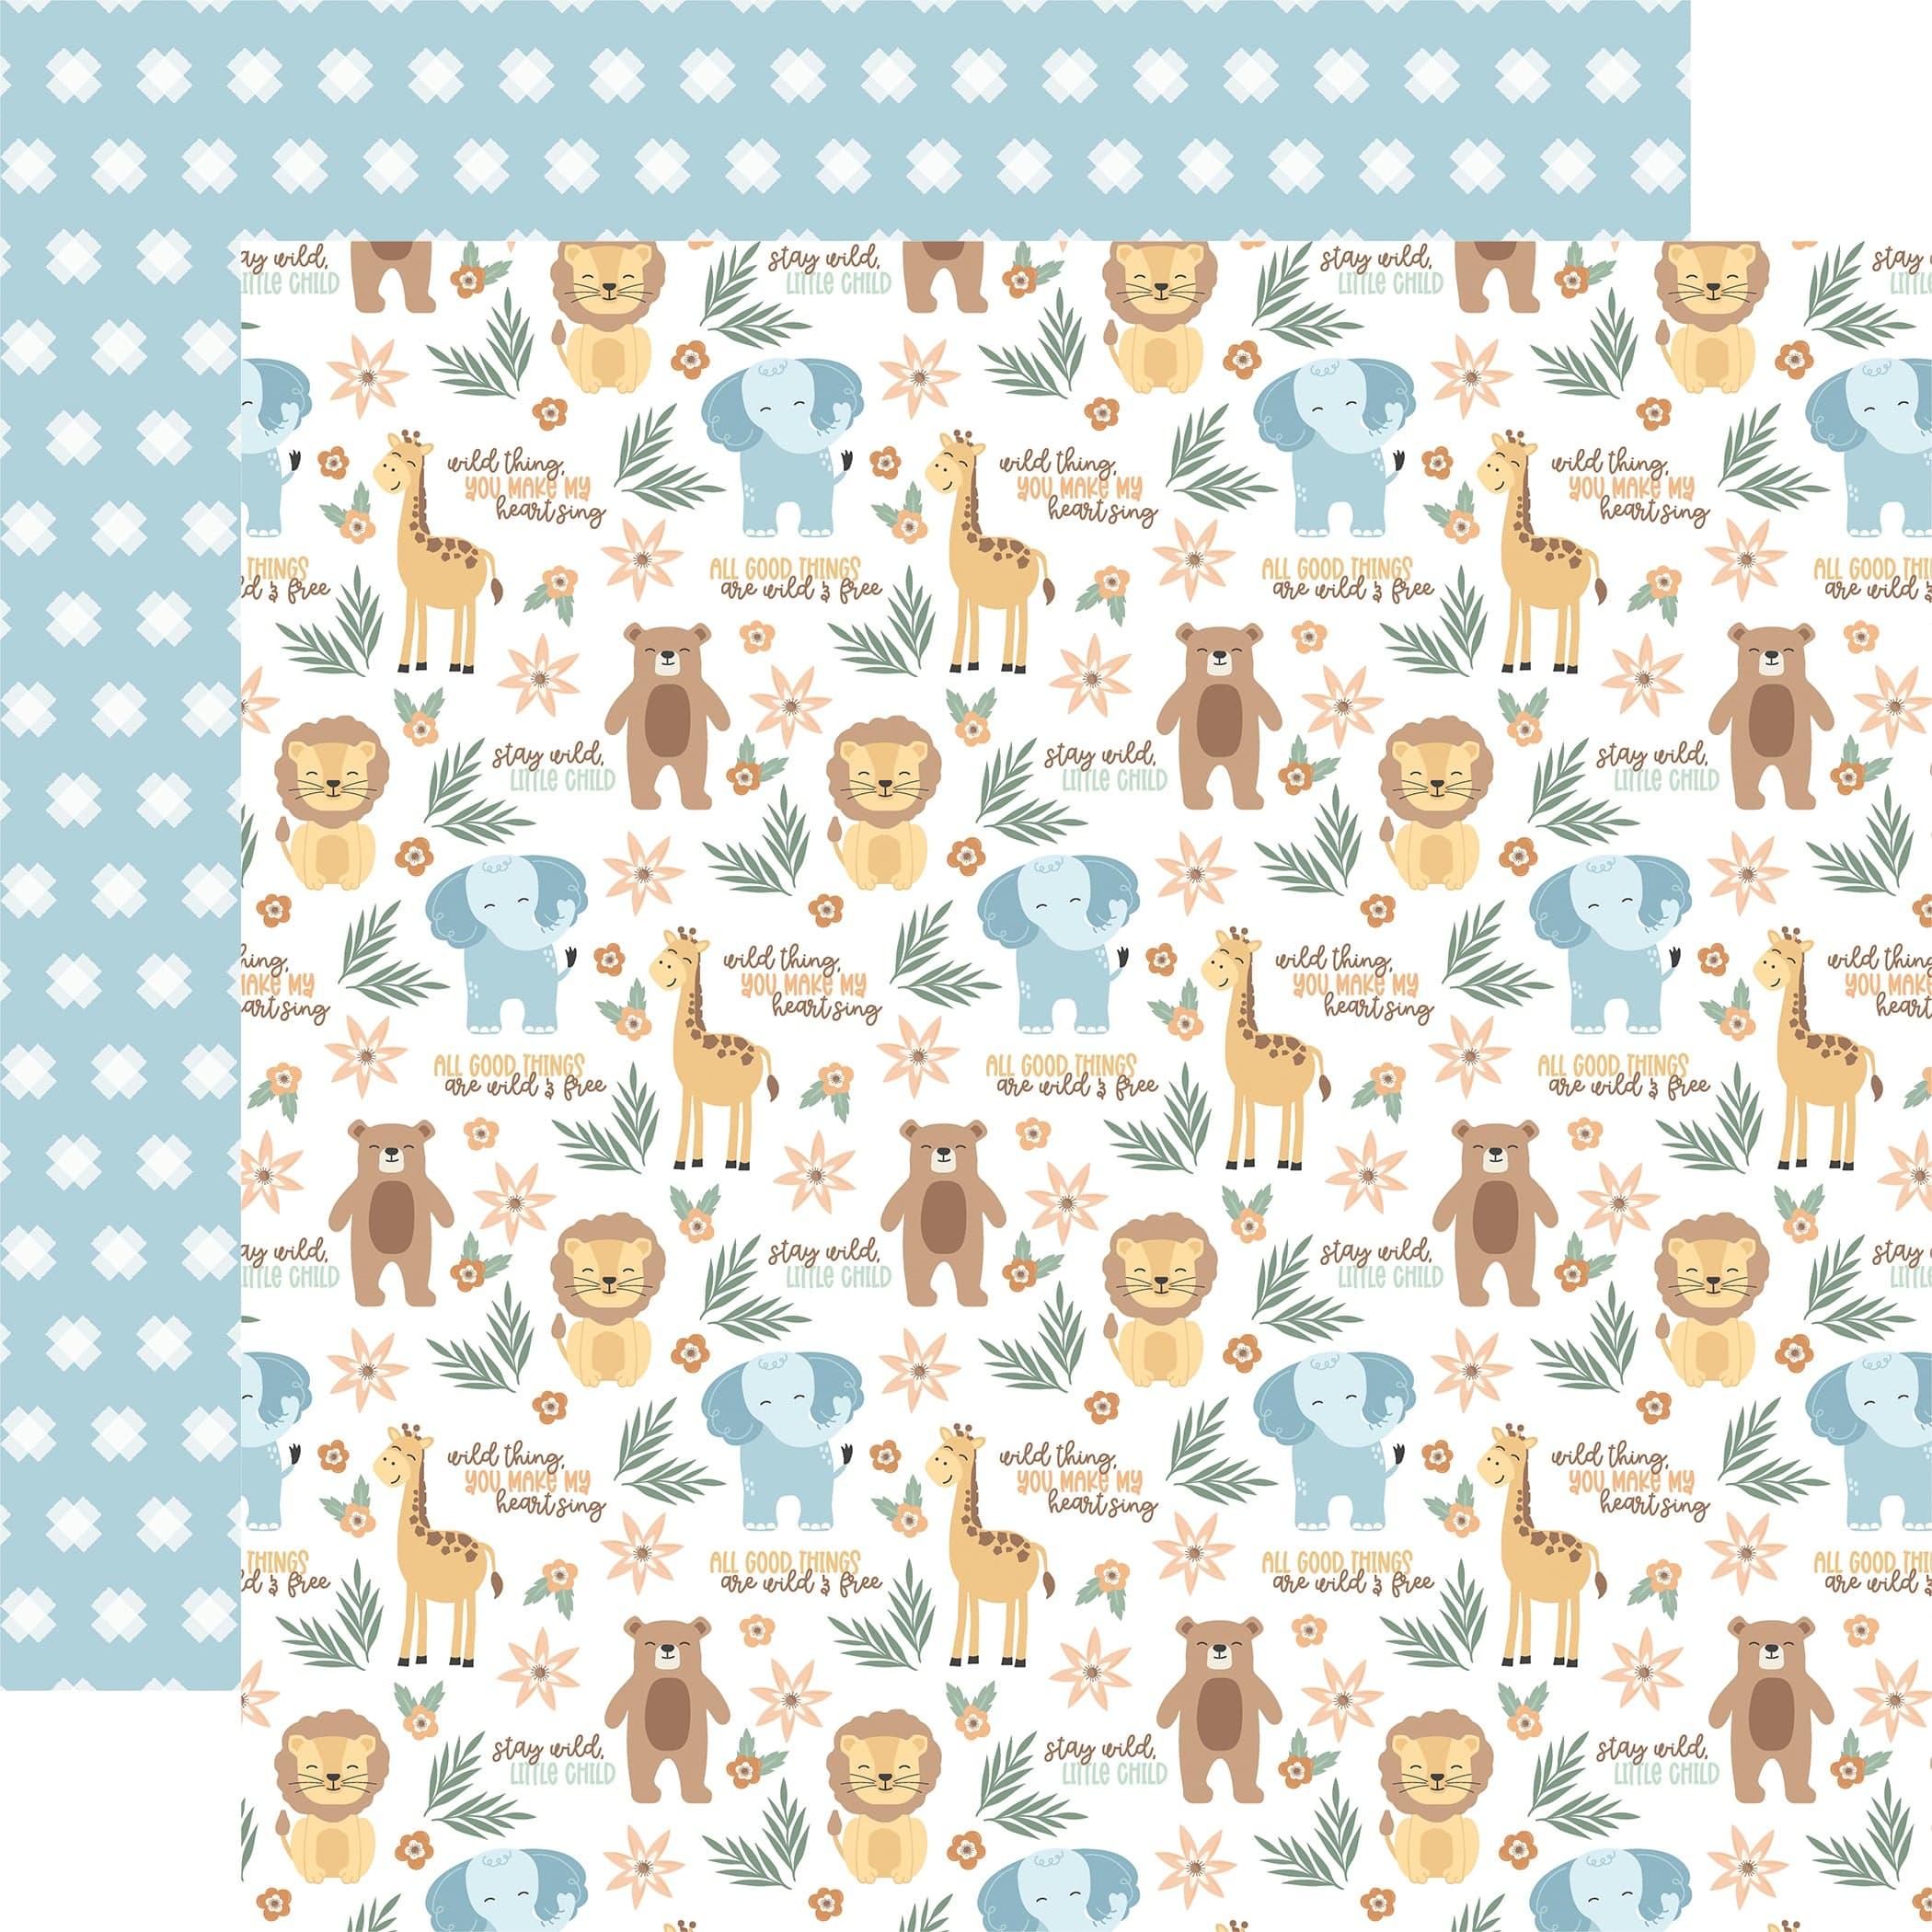 Our Baby Boy Collection Wild Animals 12 x 12 Double-Sided Scrapbook Paper by Echo Park Paper - Scrapbook Supply Companies